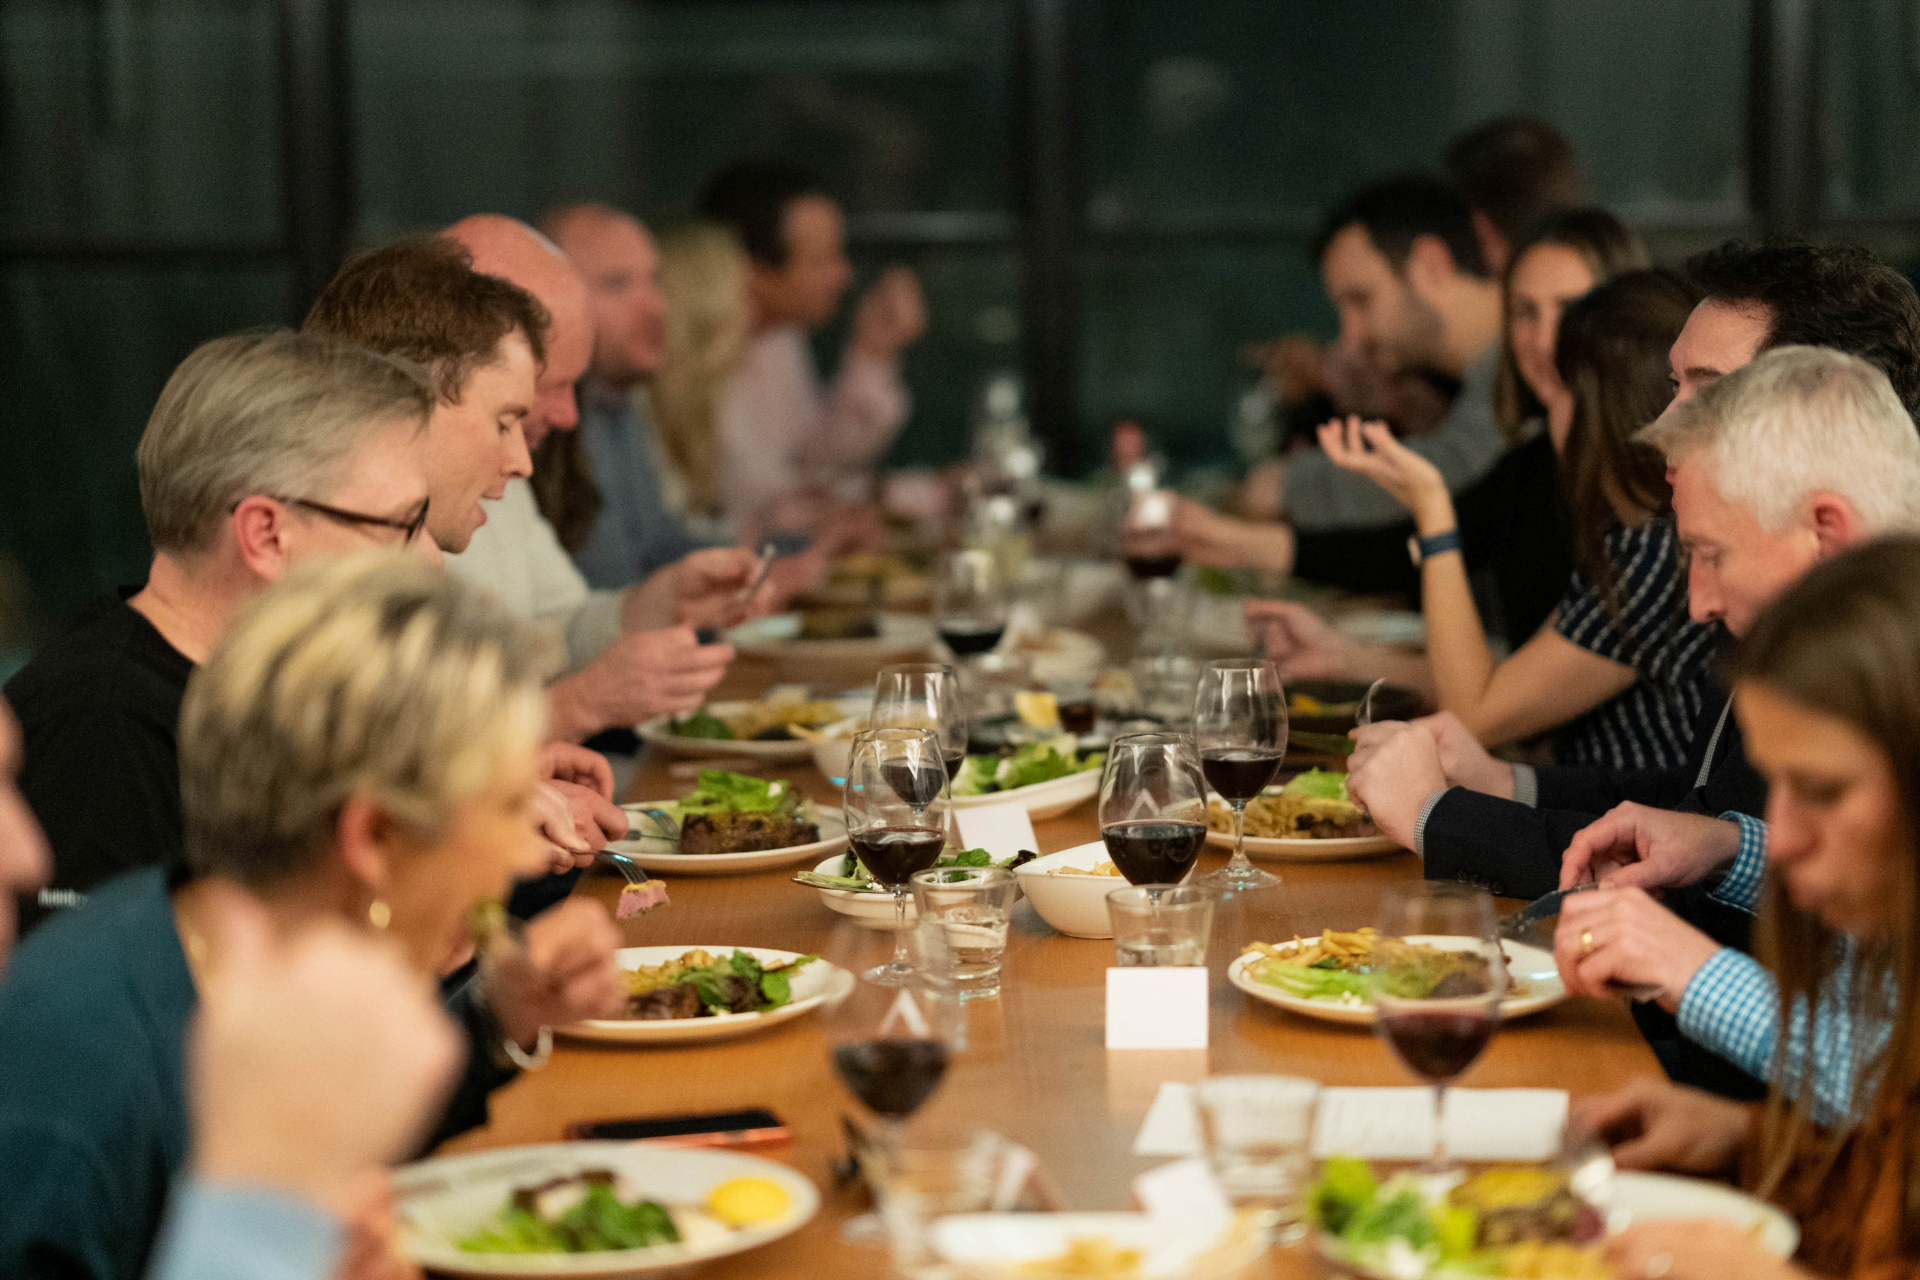 A long dinner table, full of people eating and drinking